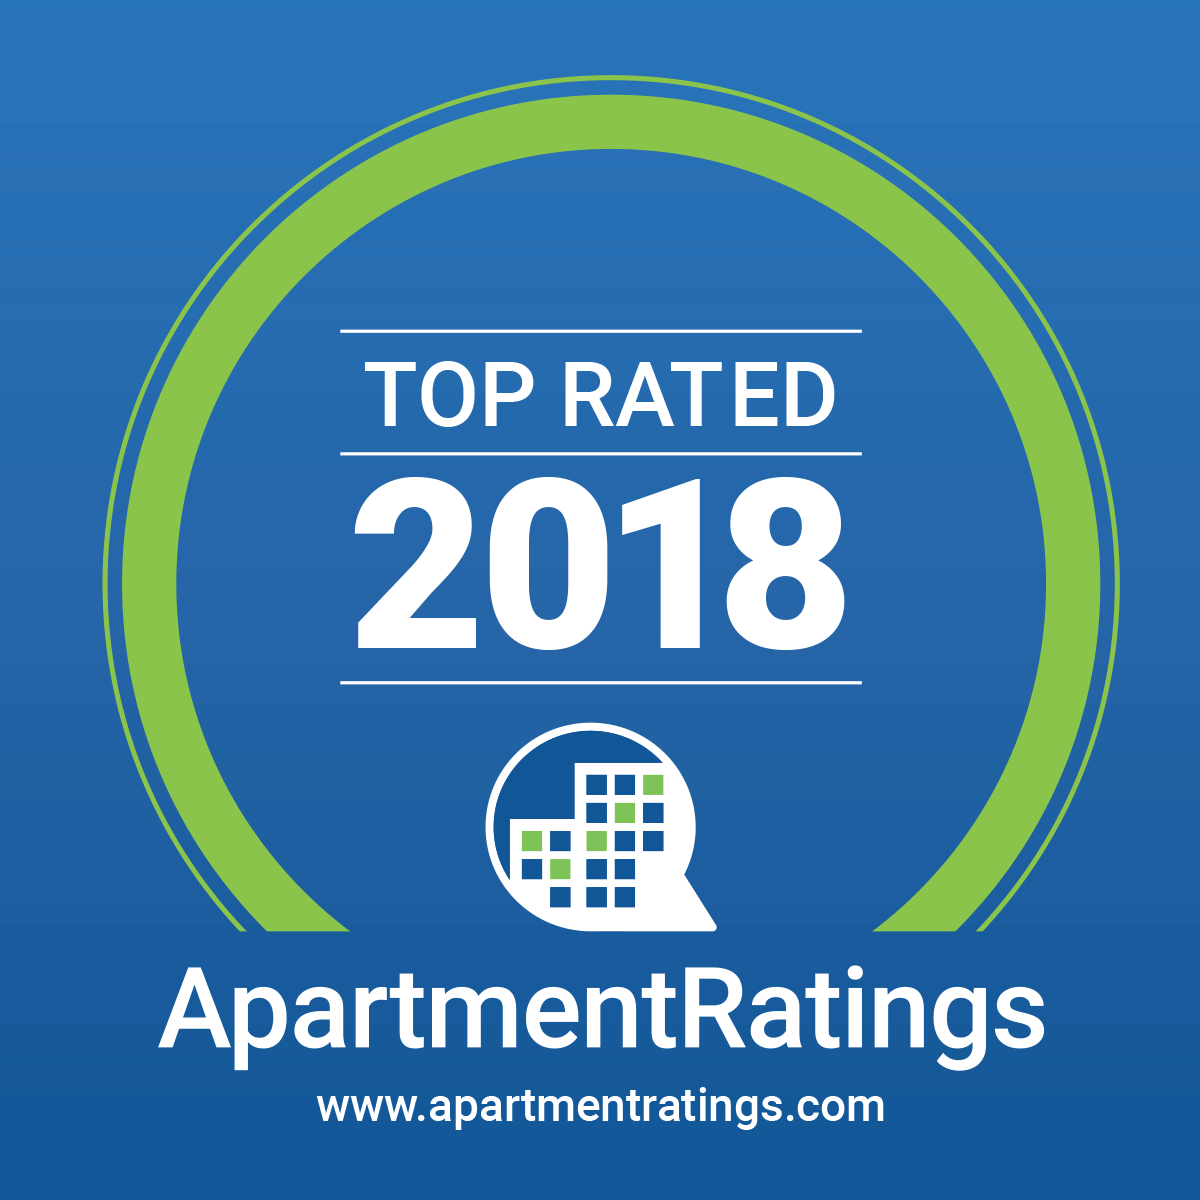 Top Rated 2018 ApartmentRatings